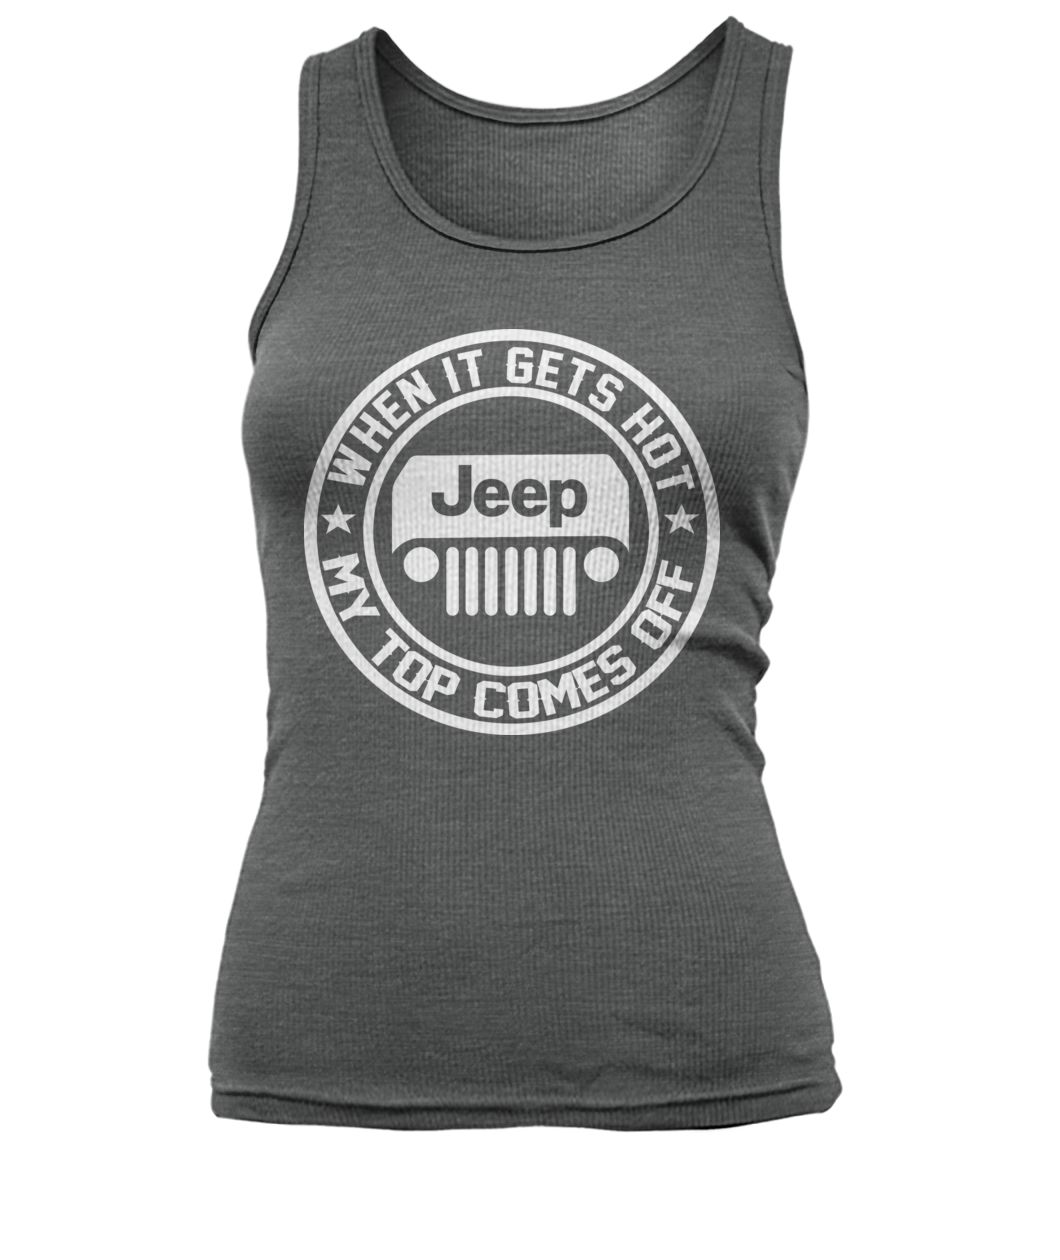 When it gets hot my top comes off jeep women's tank top